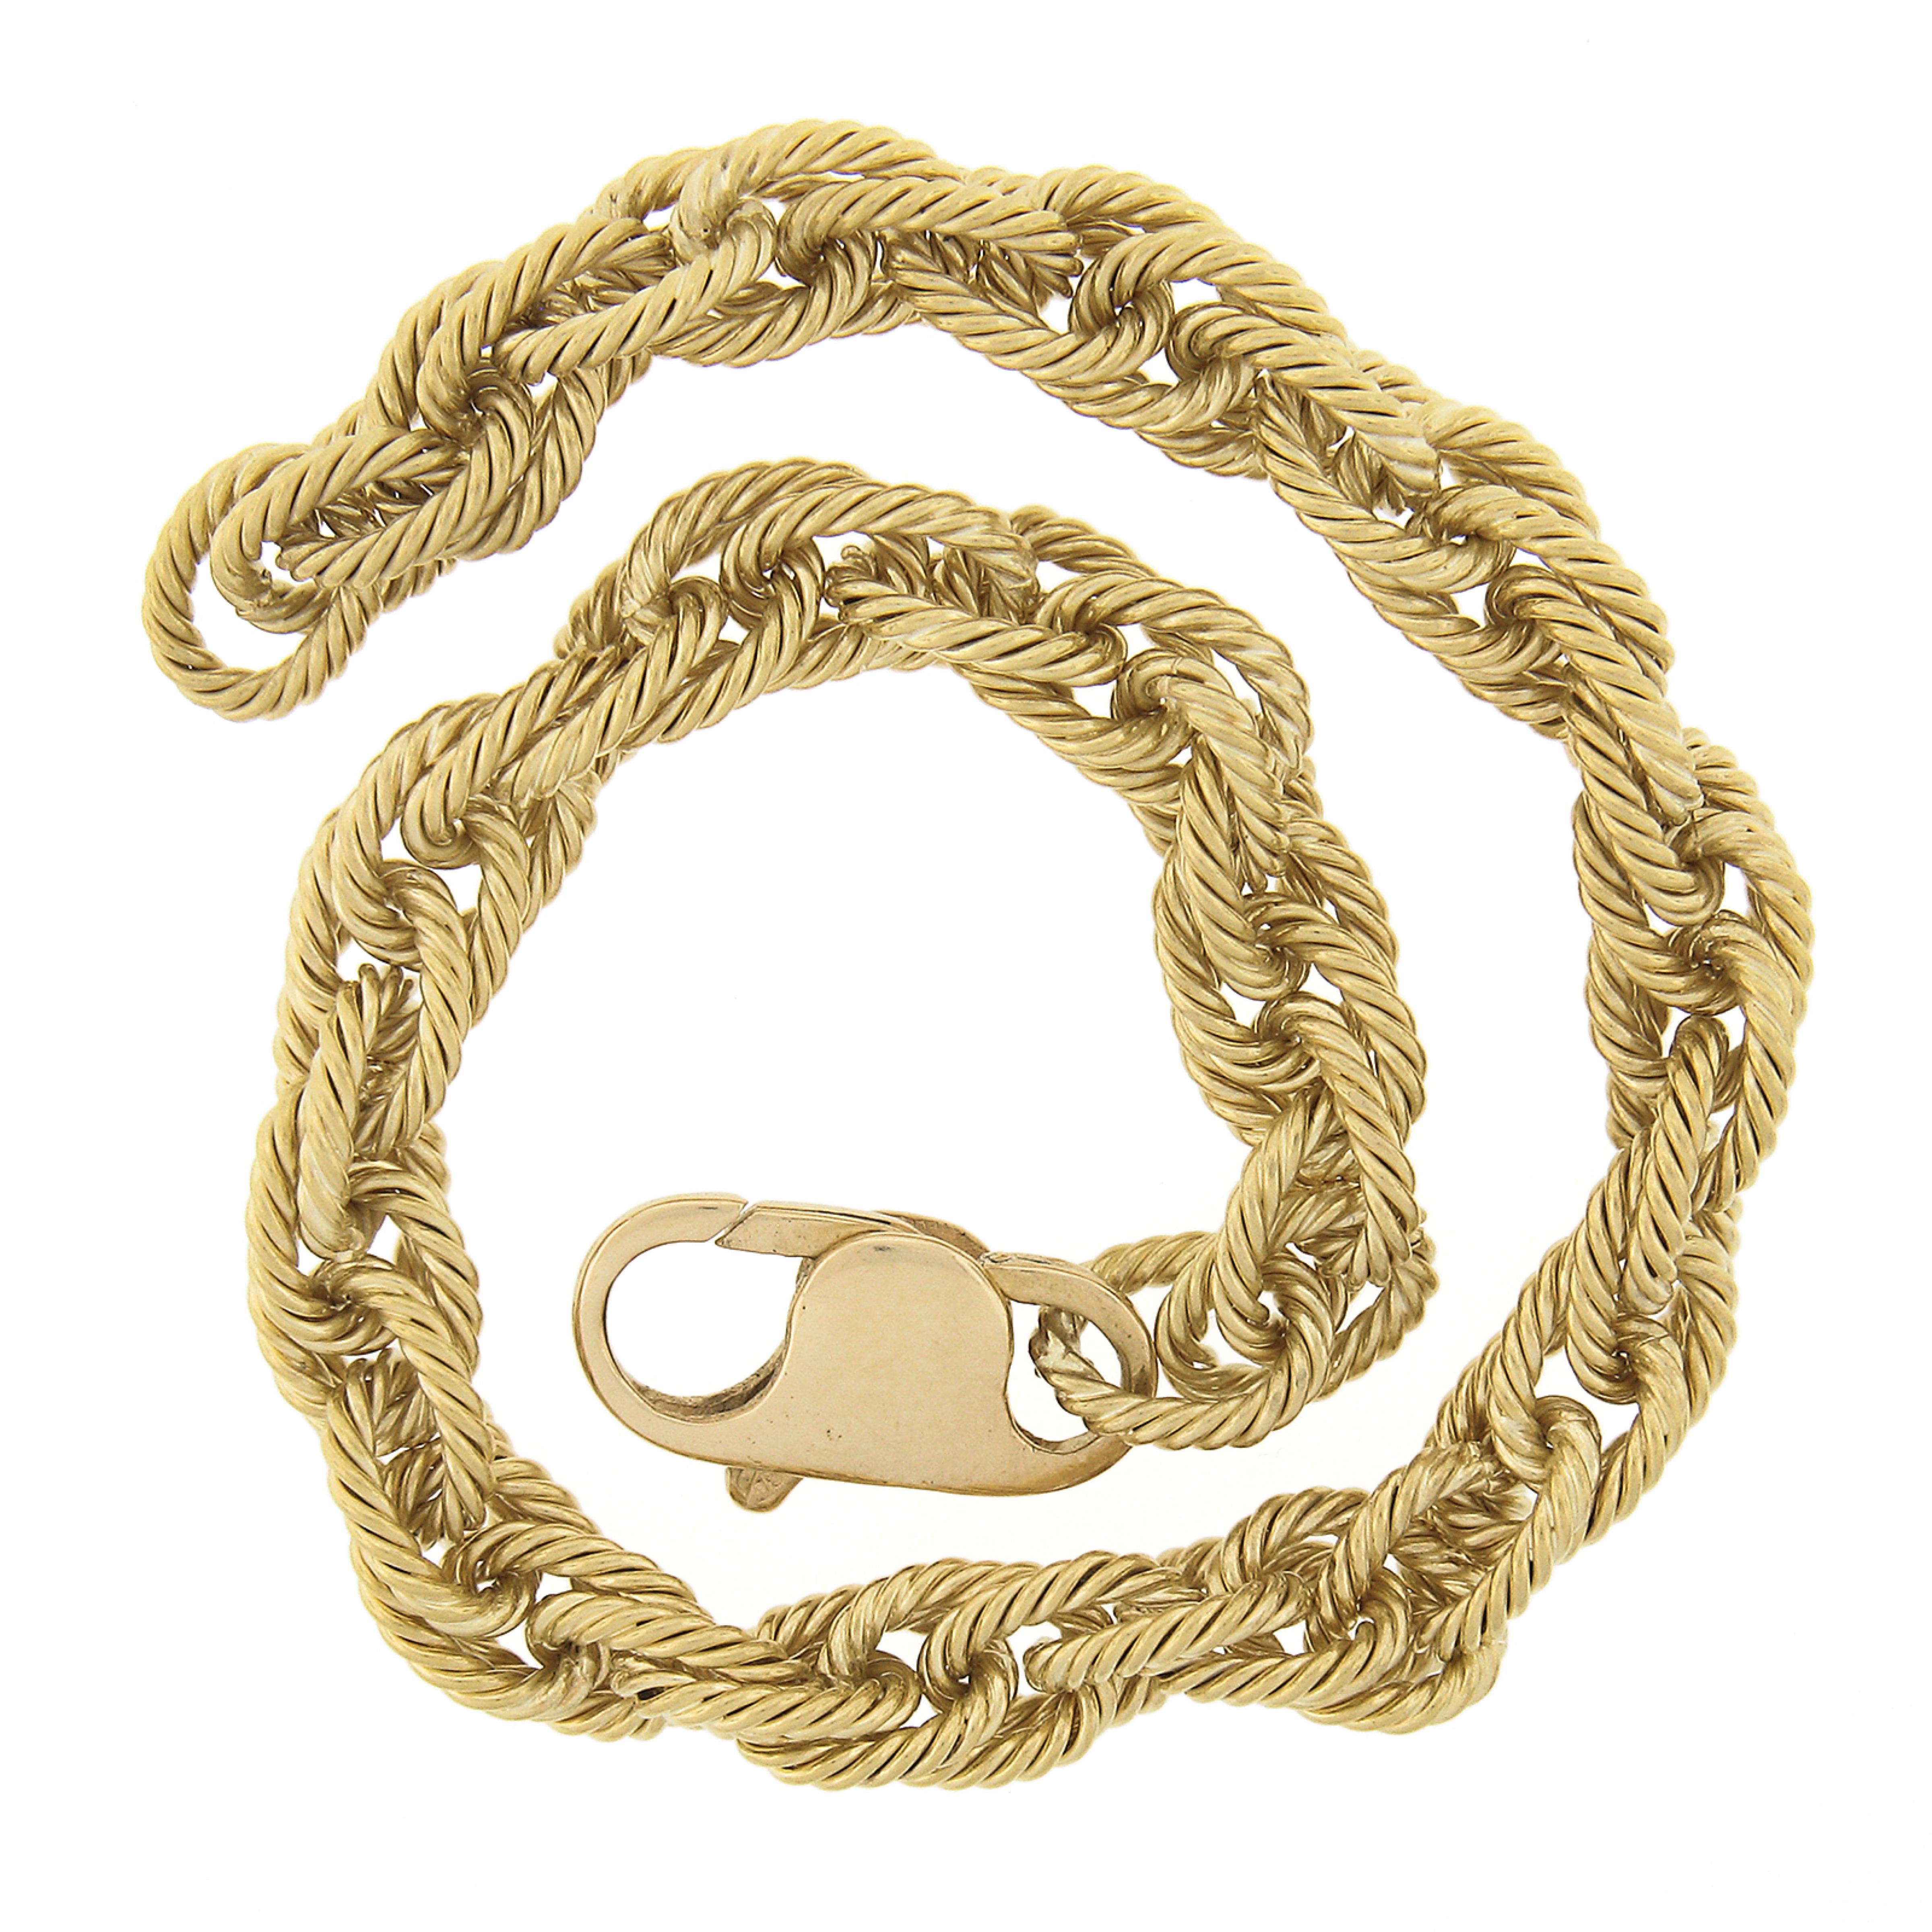 Women's or Men's 18k Yellow Gold Woven Textured Interlocking Cable Link Bracelet w/ Large Clasp